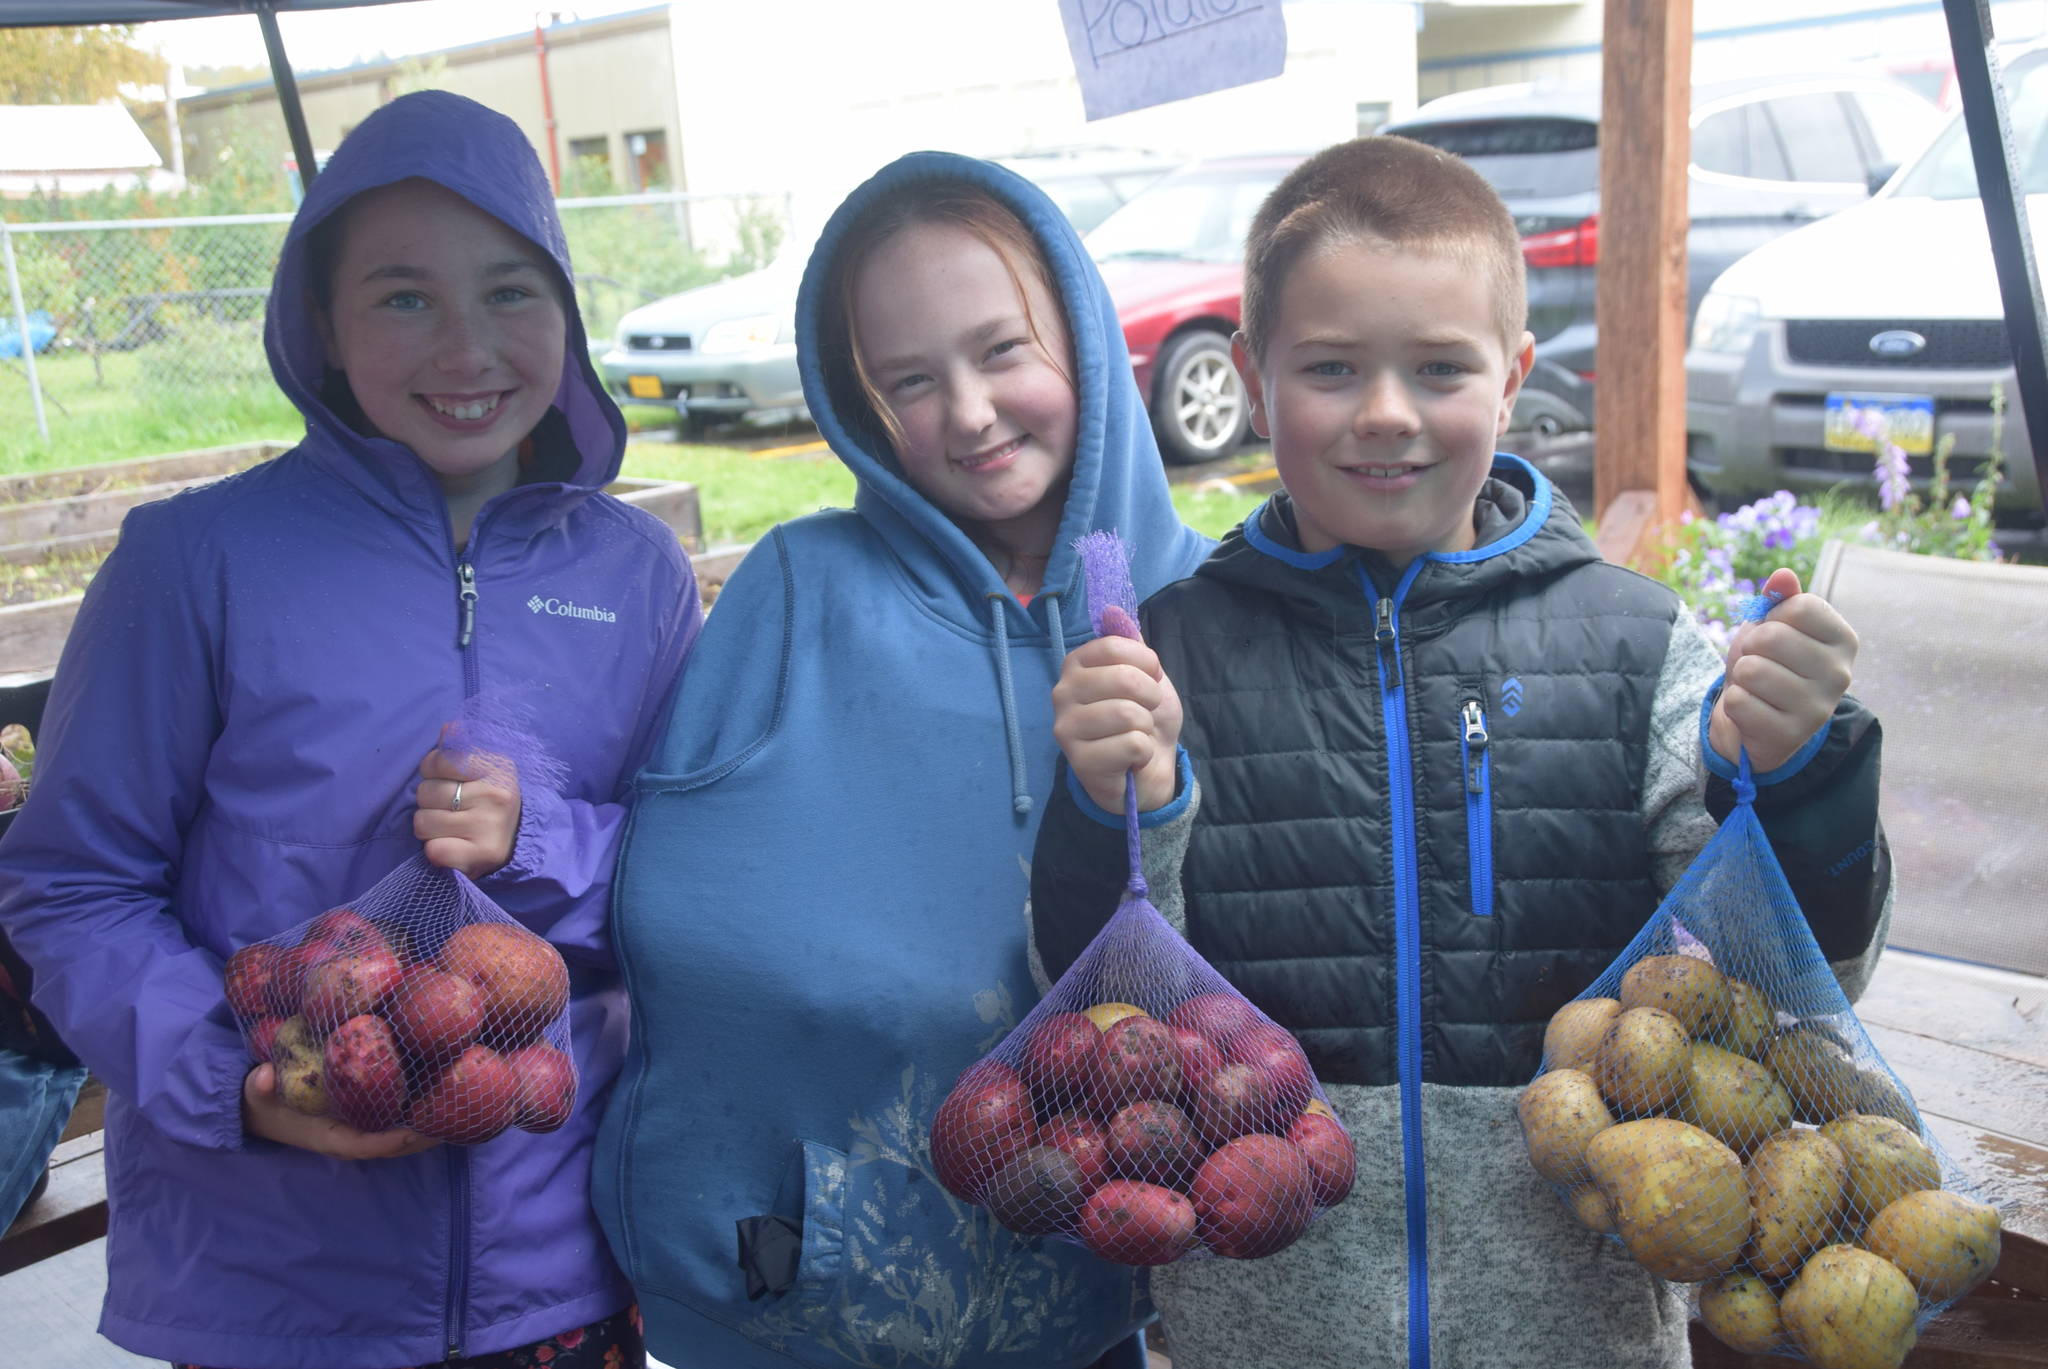 From left, Kendra Bailey, Emma McKay and Tristen Barnes show off their potatoes at the Montessori Farmer’s Market at the Soldotna Montessori School on Sept. 13, 2019. (Photo by Brian Mazurek/Peninsula Clarion)